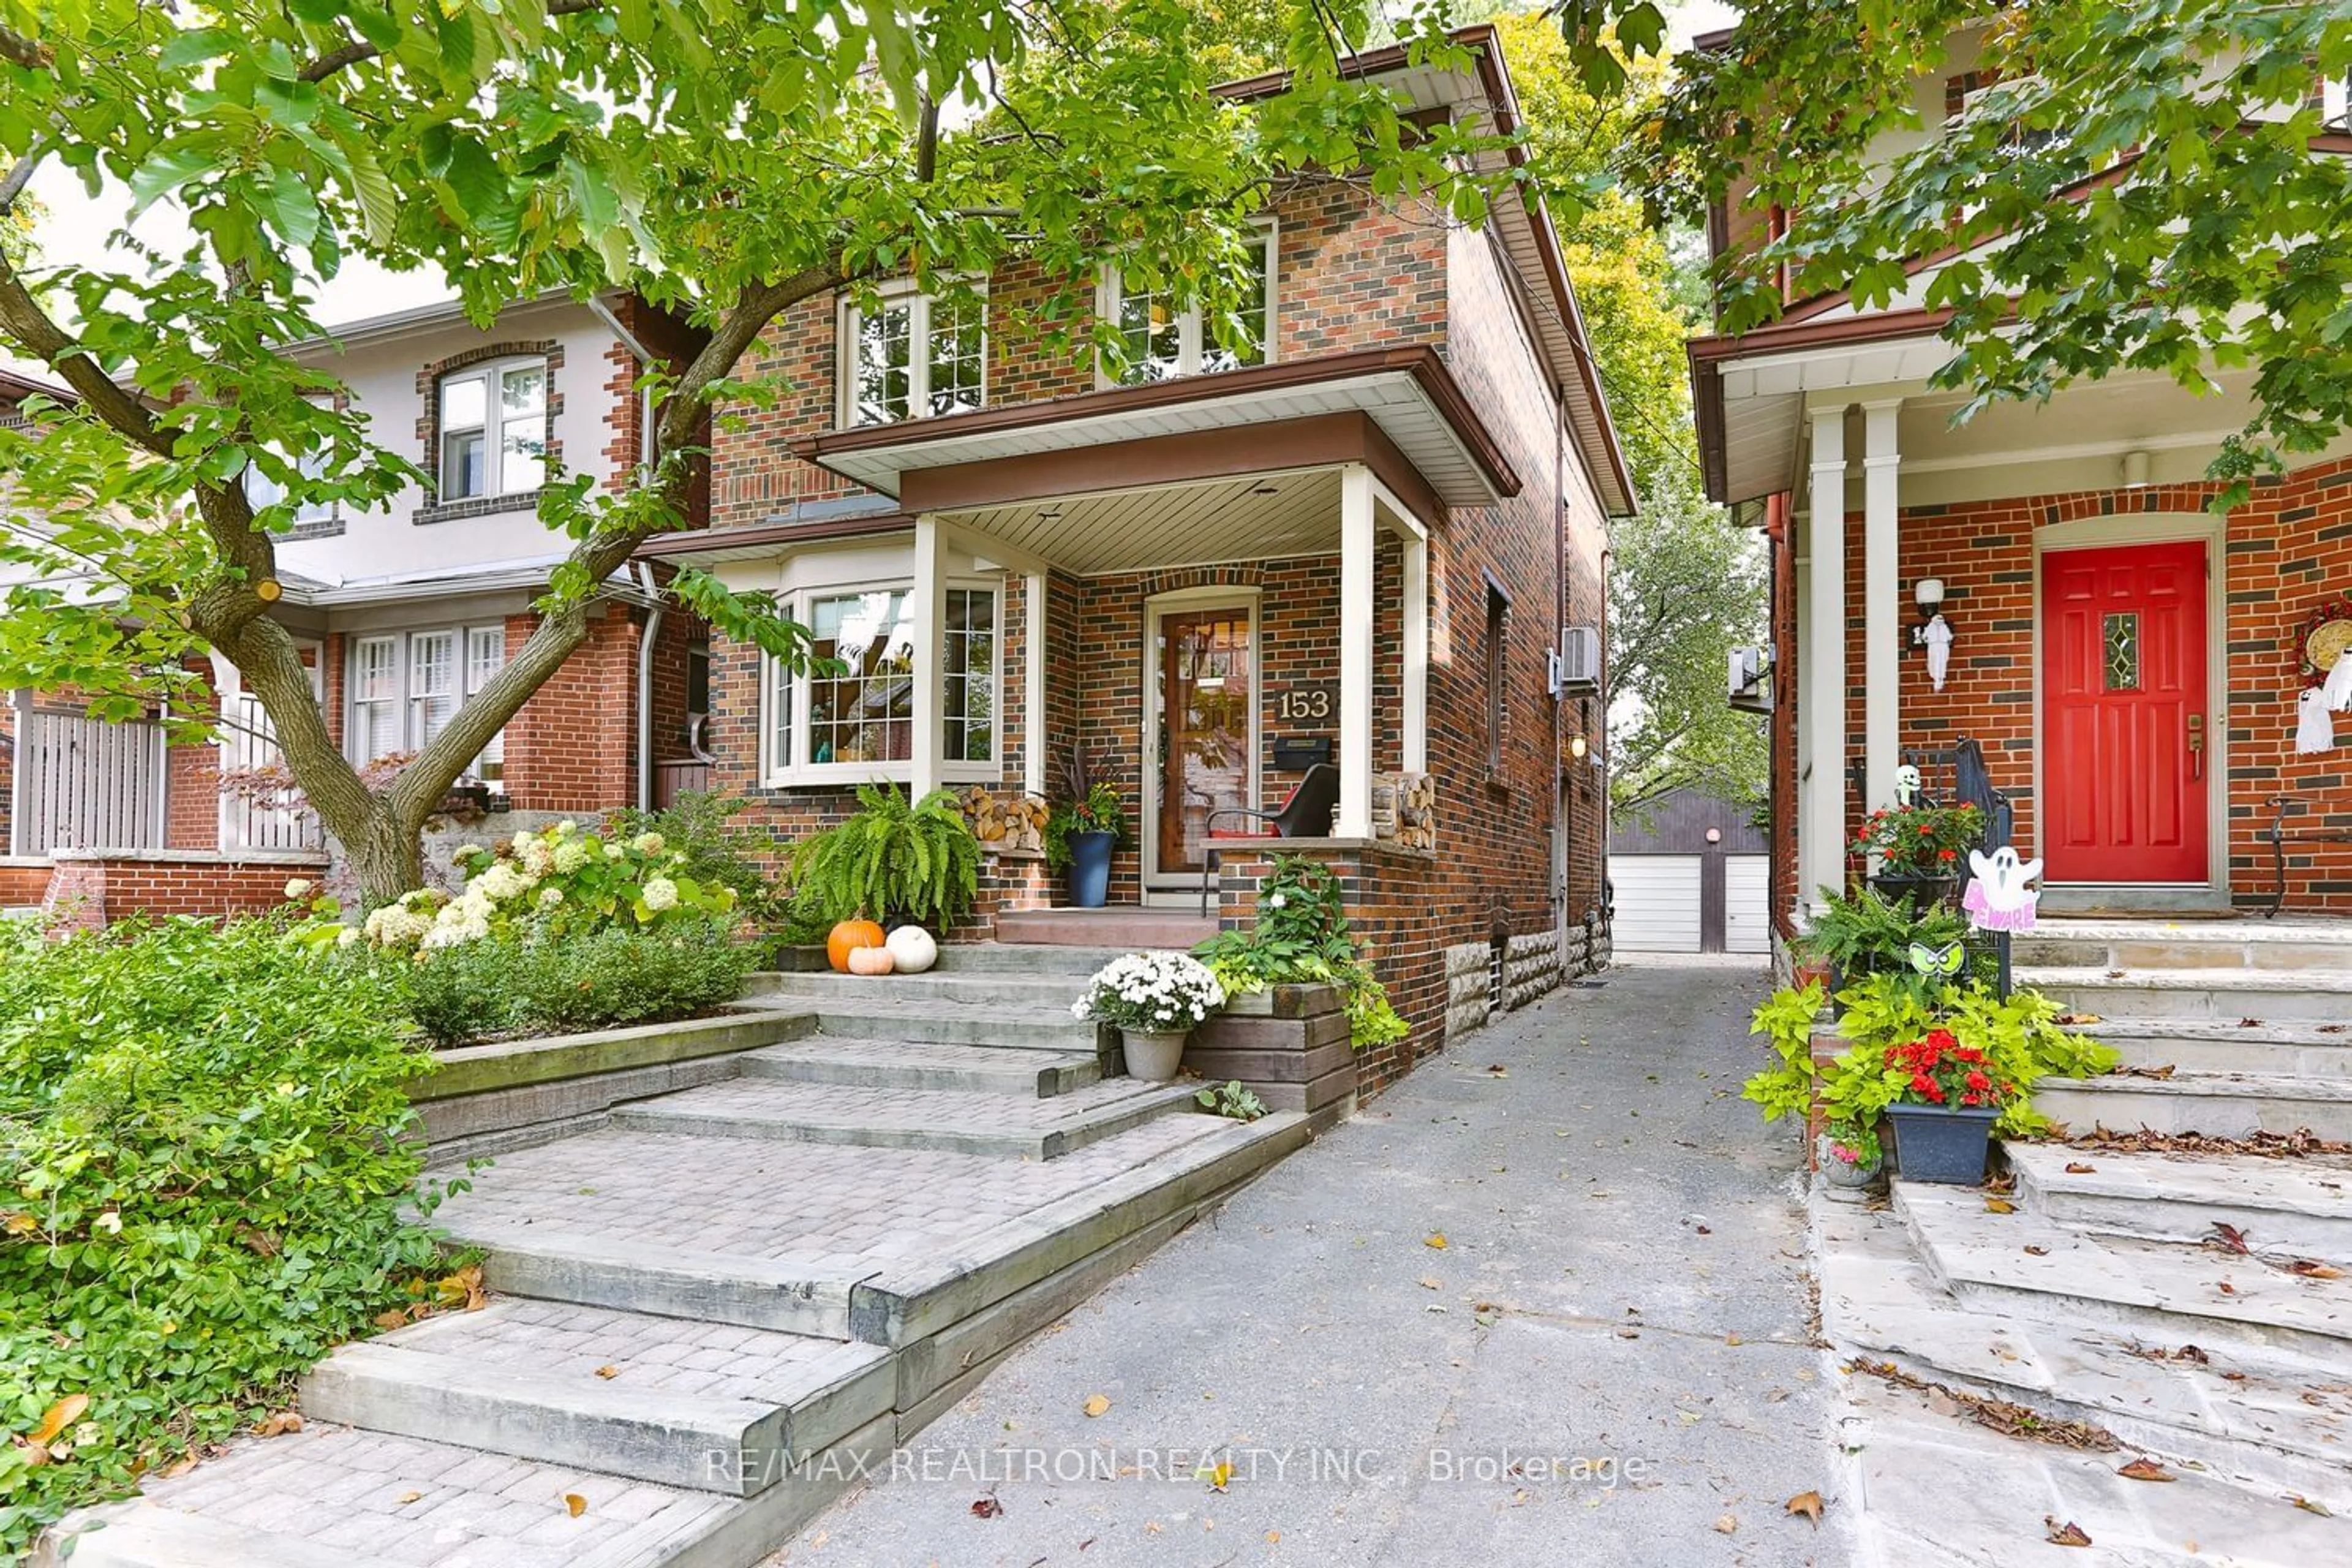 Home with brick exterior material for 153 Rosewell Ave, Toronto Ontario M4R 2A5